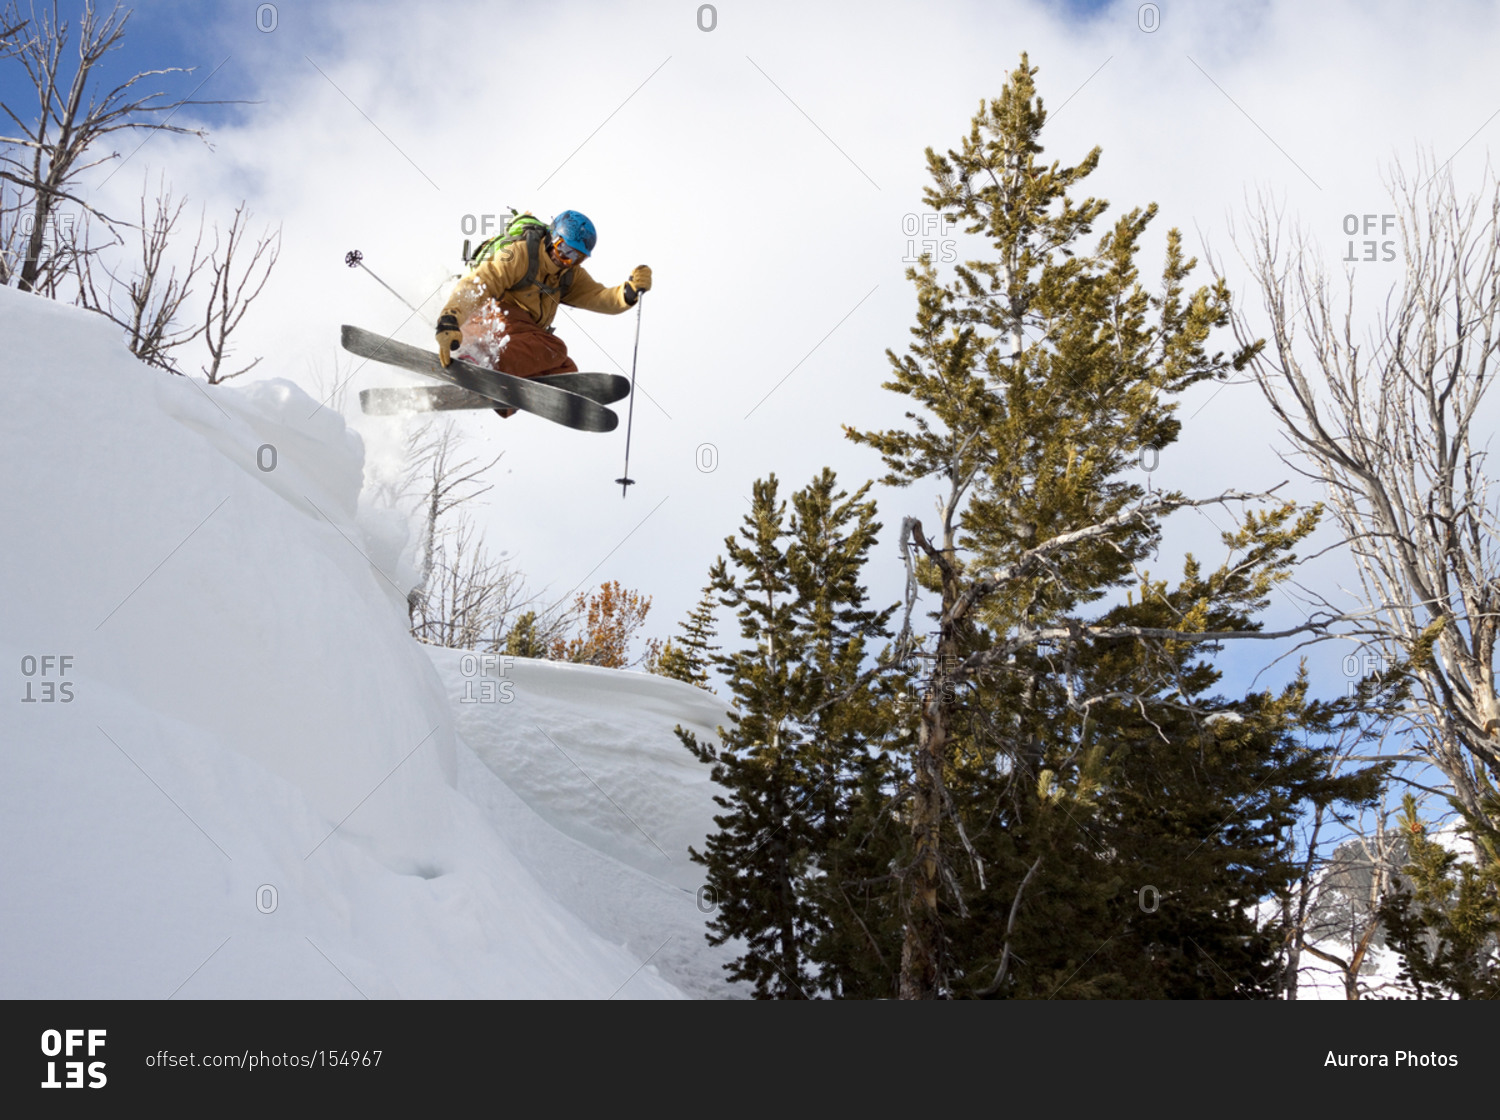 A male backcountry skier catches air off a cornice in the Beehive Basin near Big Sky, Montana